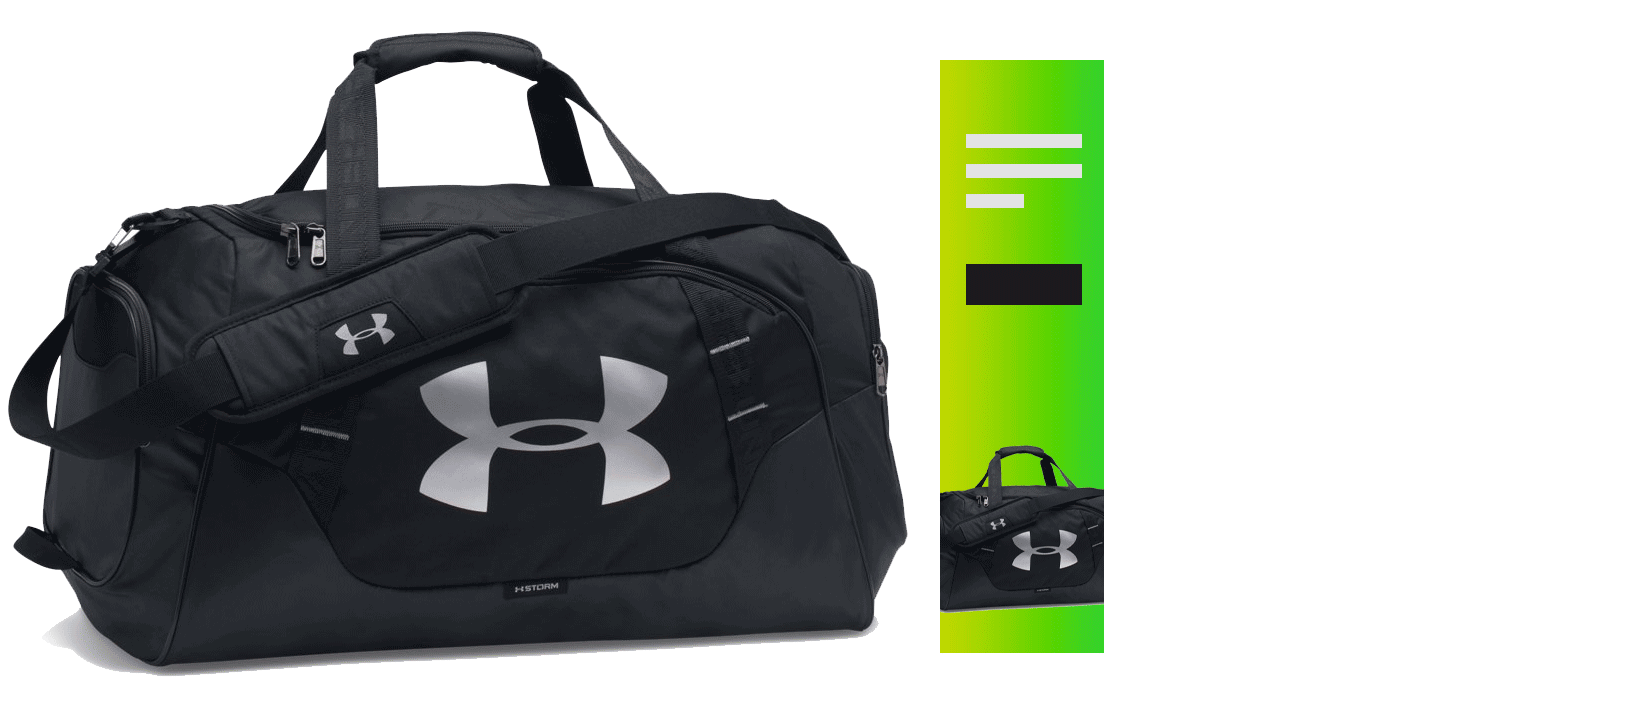 Example of Amazon video ad placement with Under Armour bag